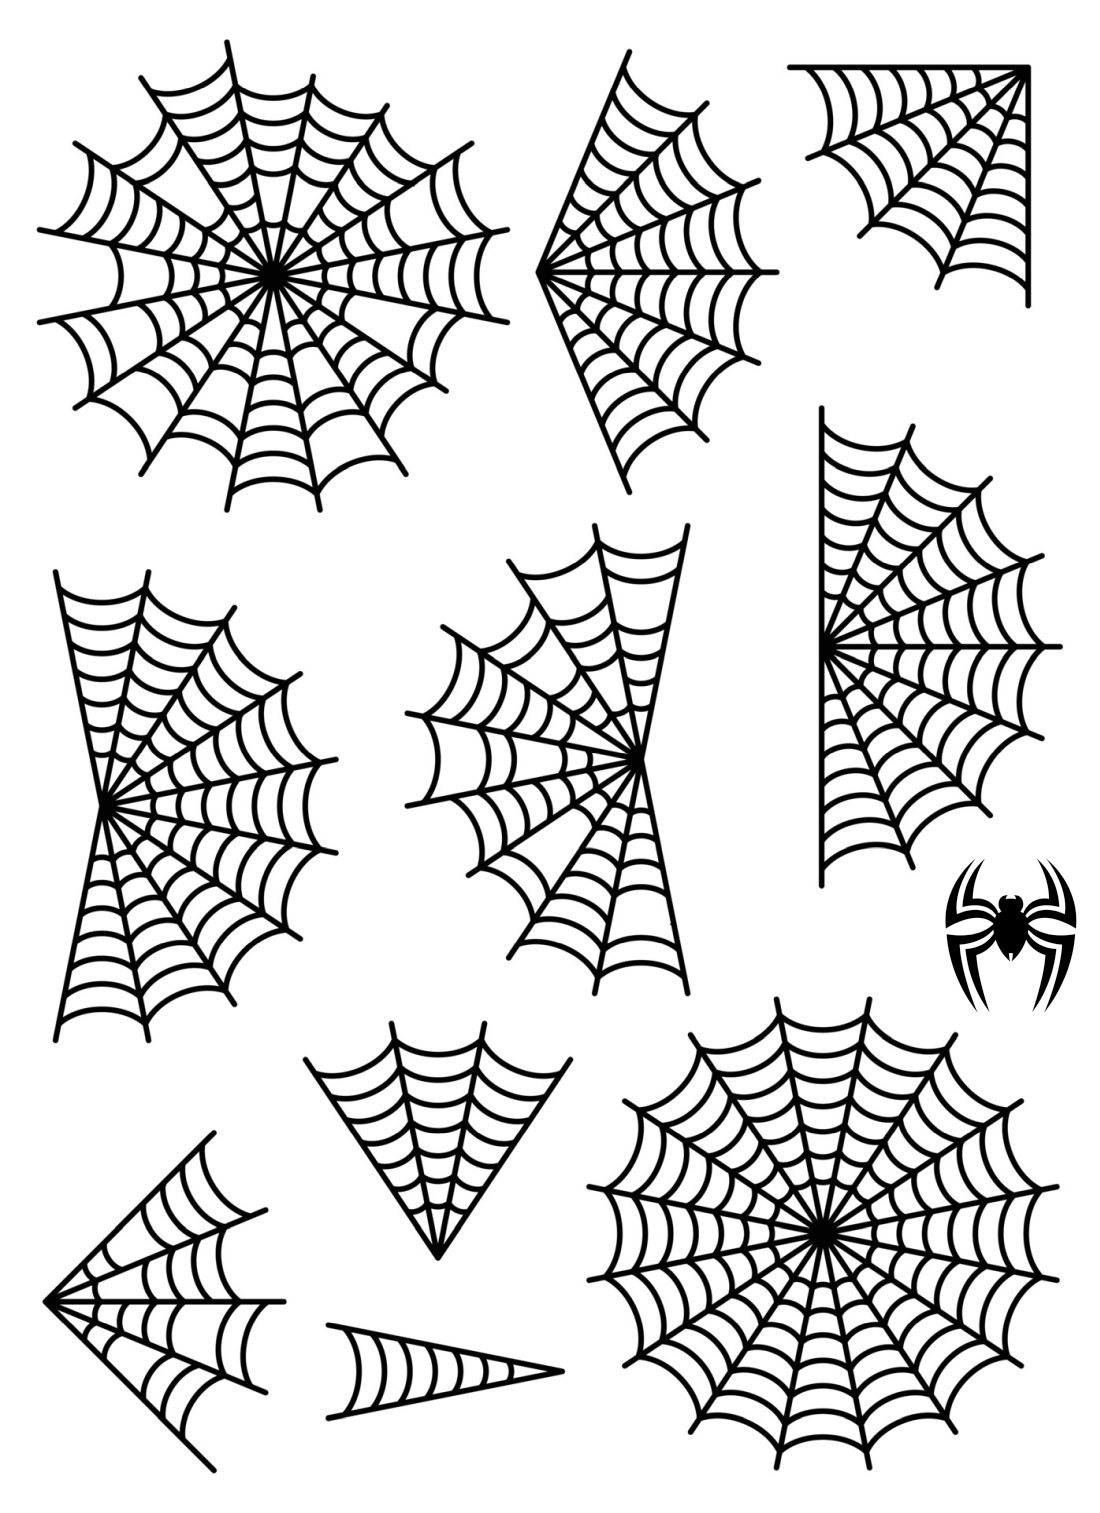 Spider-web for coloring